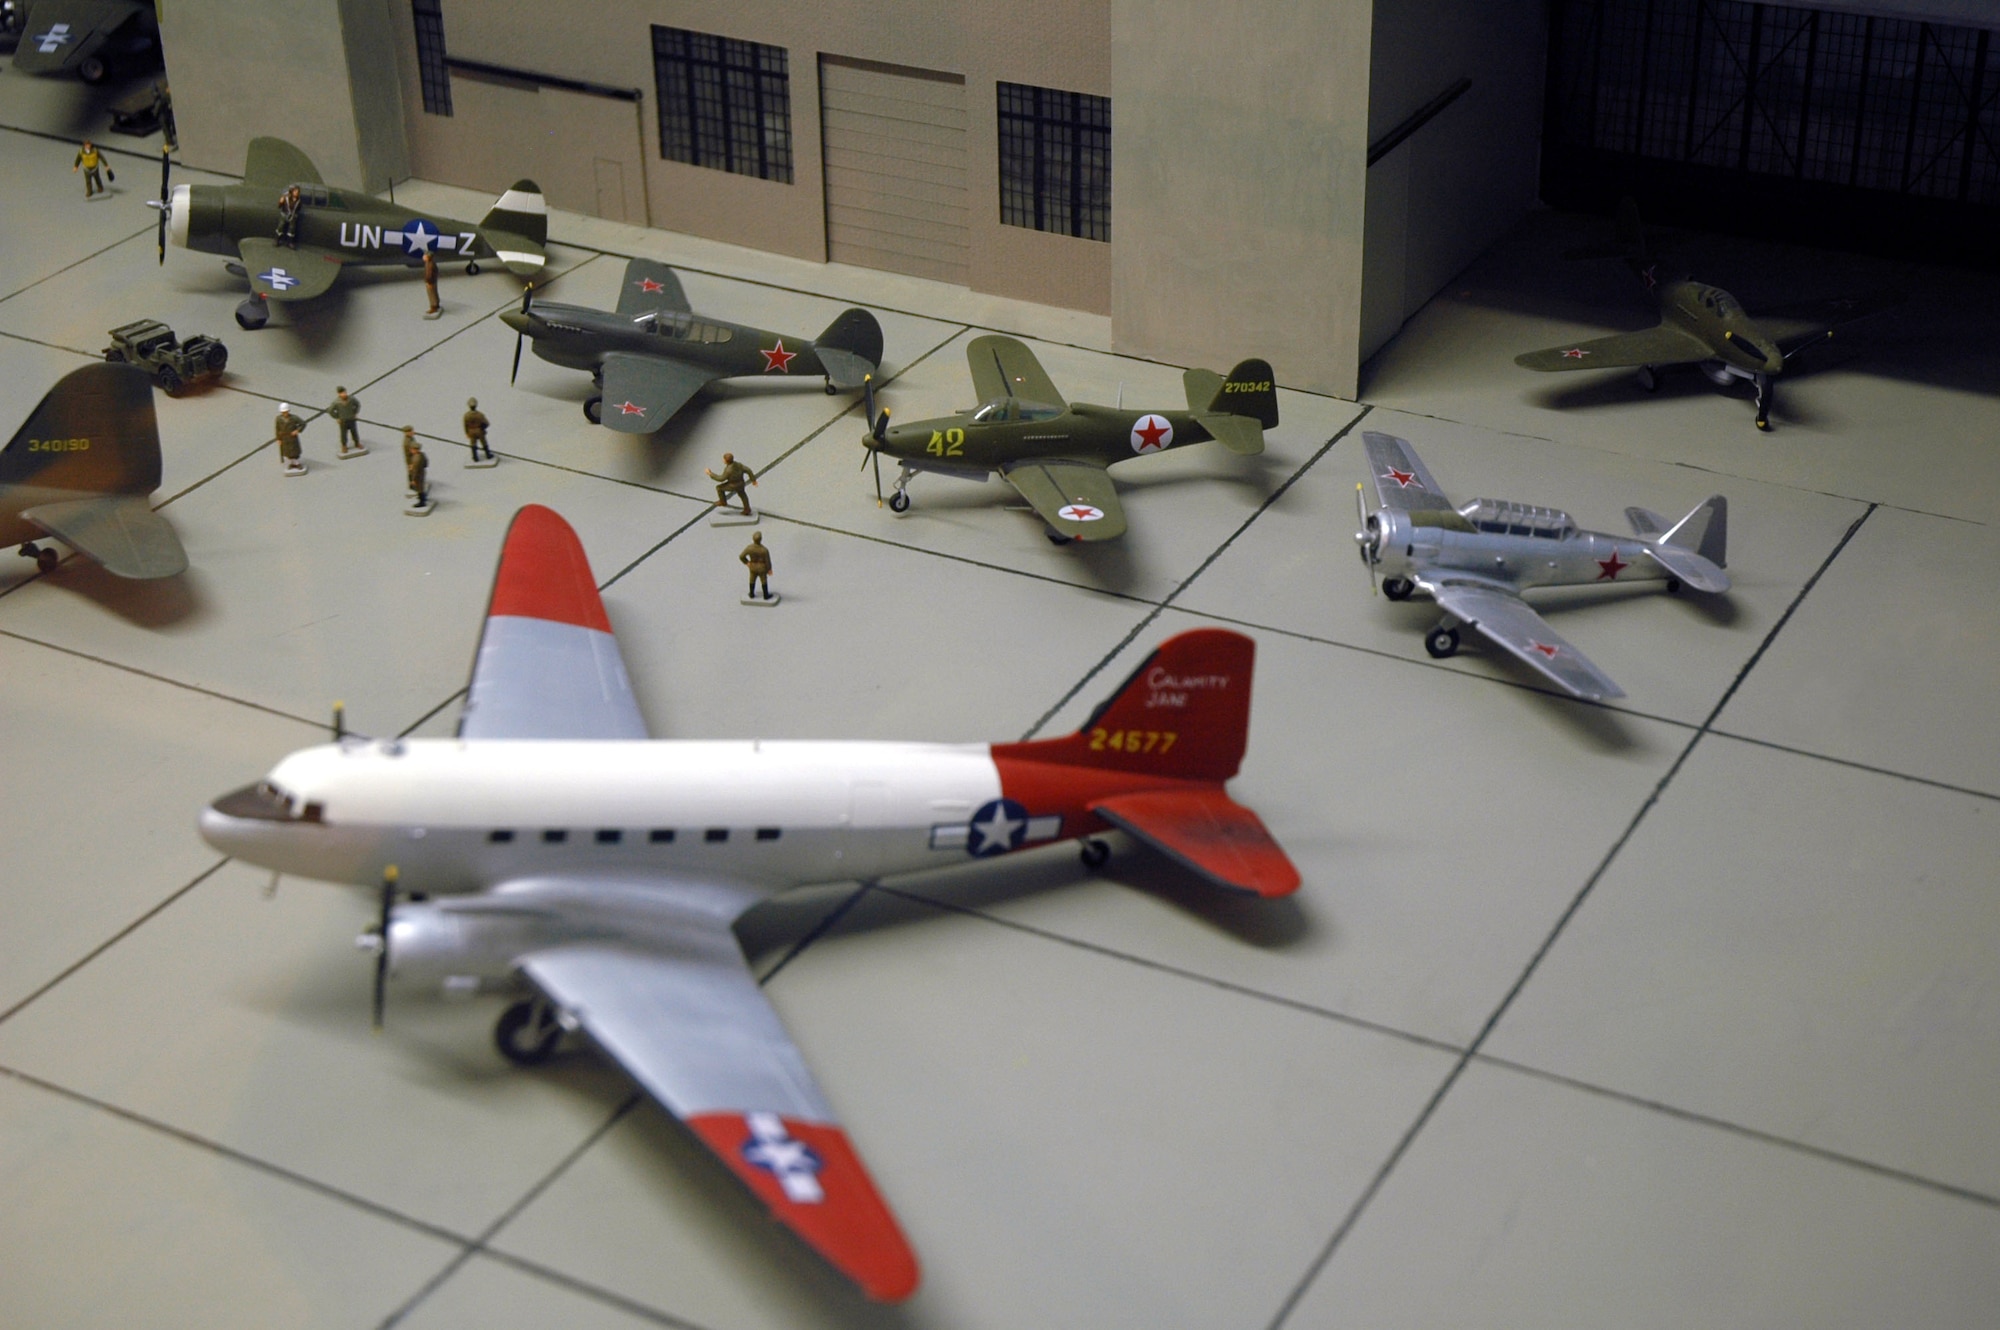 A diorama depicting a hangar during the Lend-Lease program, which provided equipment and aircraft to Russia during World War II is on display at the Malmstrom Museum. The museum is open Monday to Friday from 10 a.m. to 4 p.m. (U.S. Air Force photo/Airman 1st Class Dillon White)